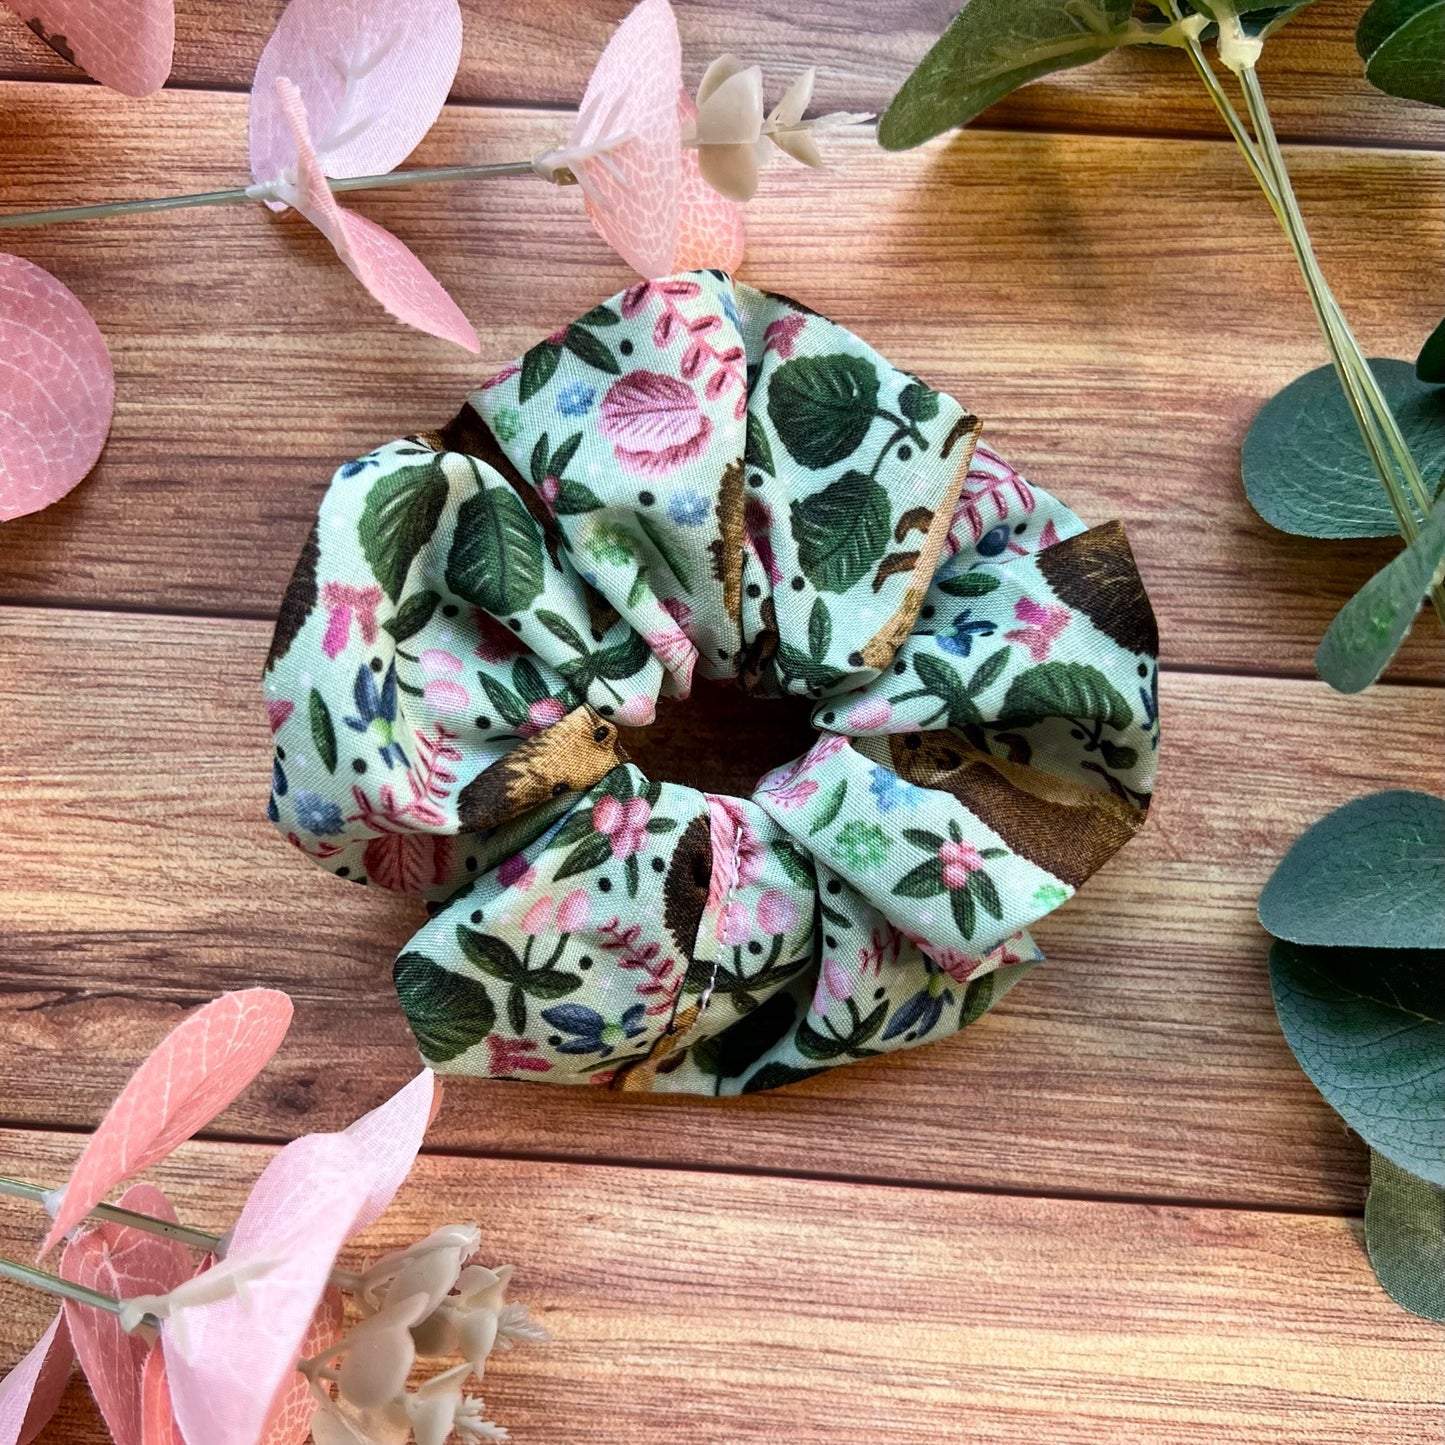  Closeup of hedgehog patterned scrunchie on a wooden backdrop with flowers and foliage around it